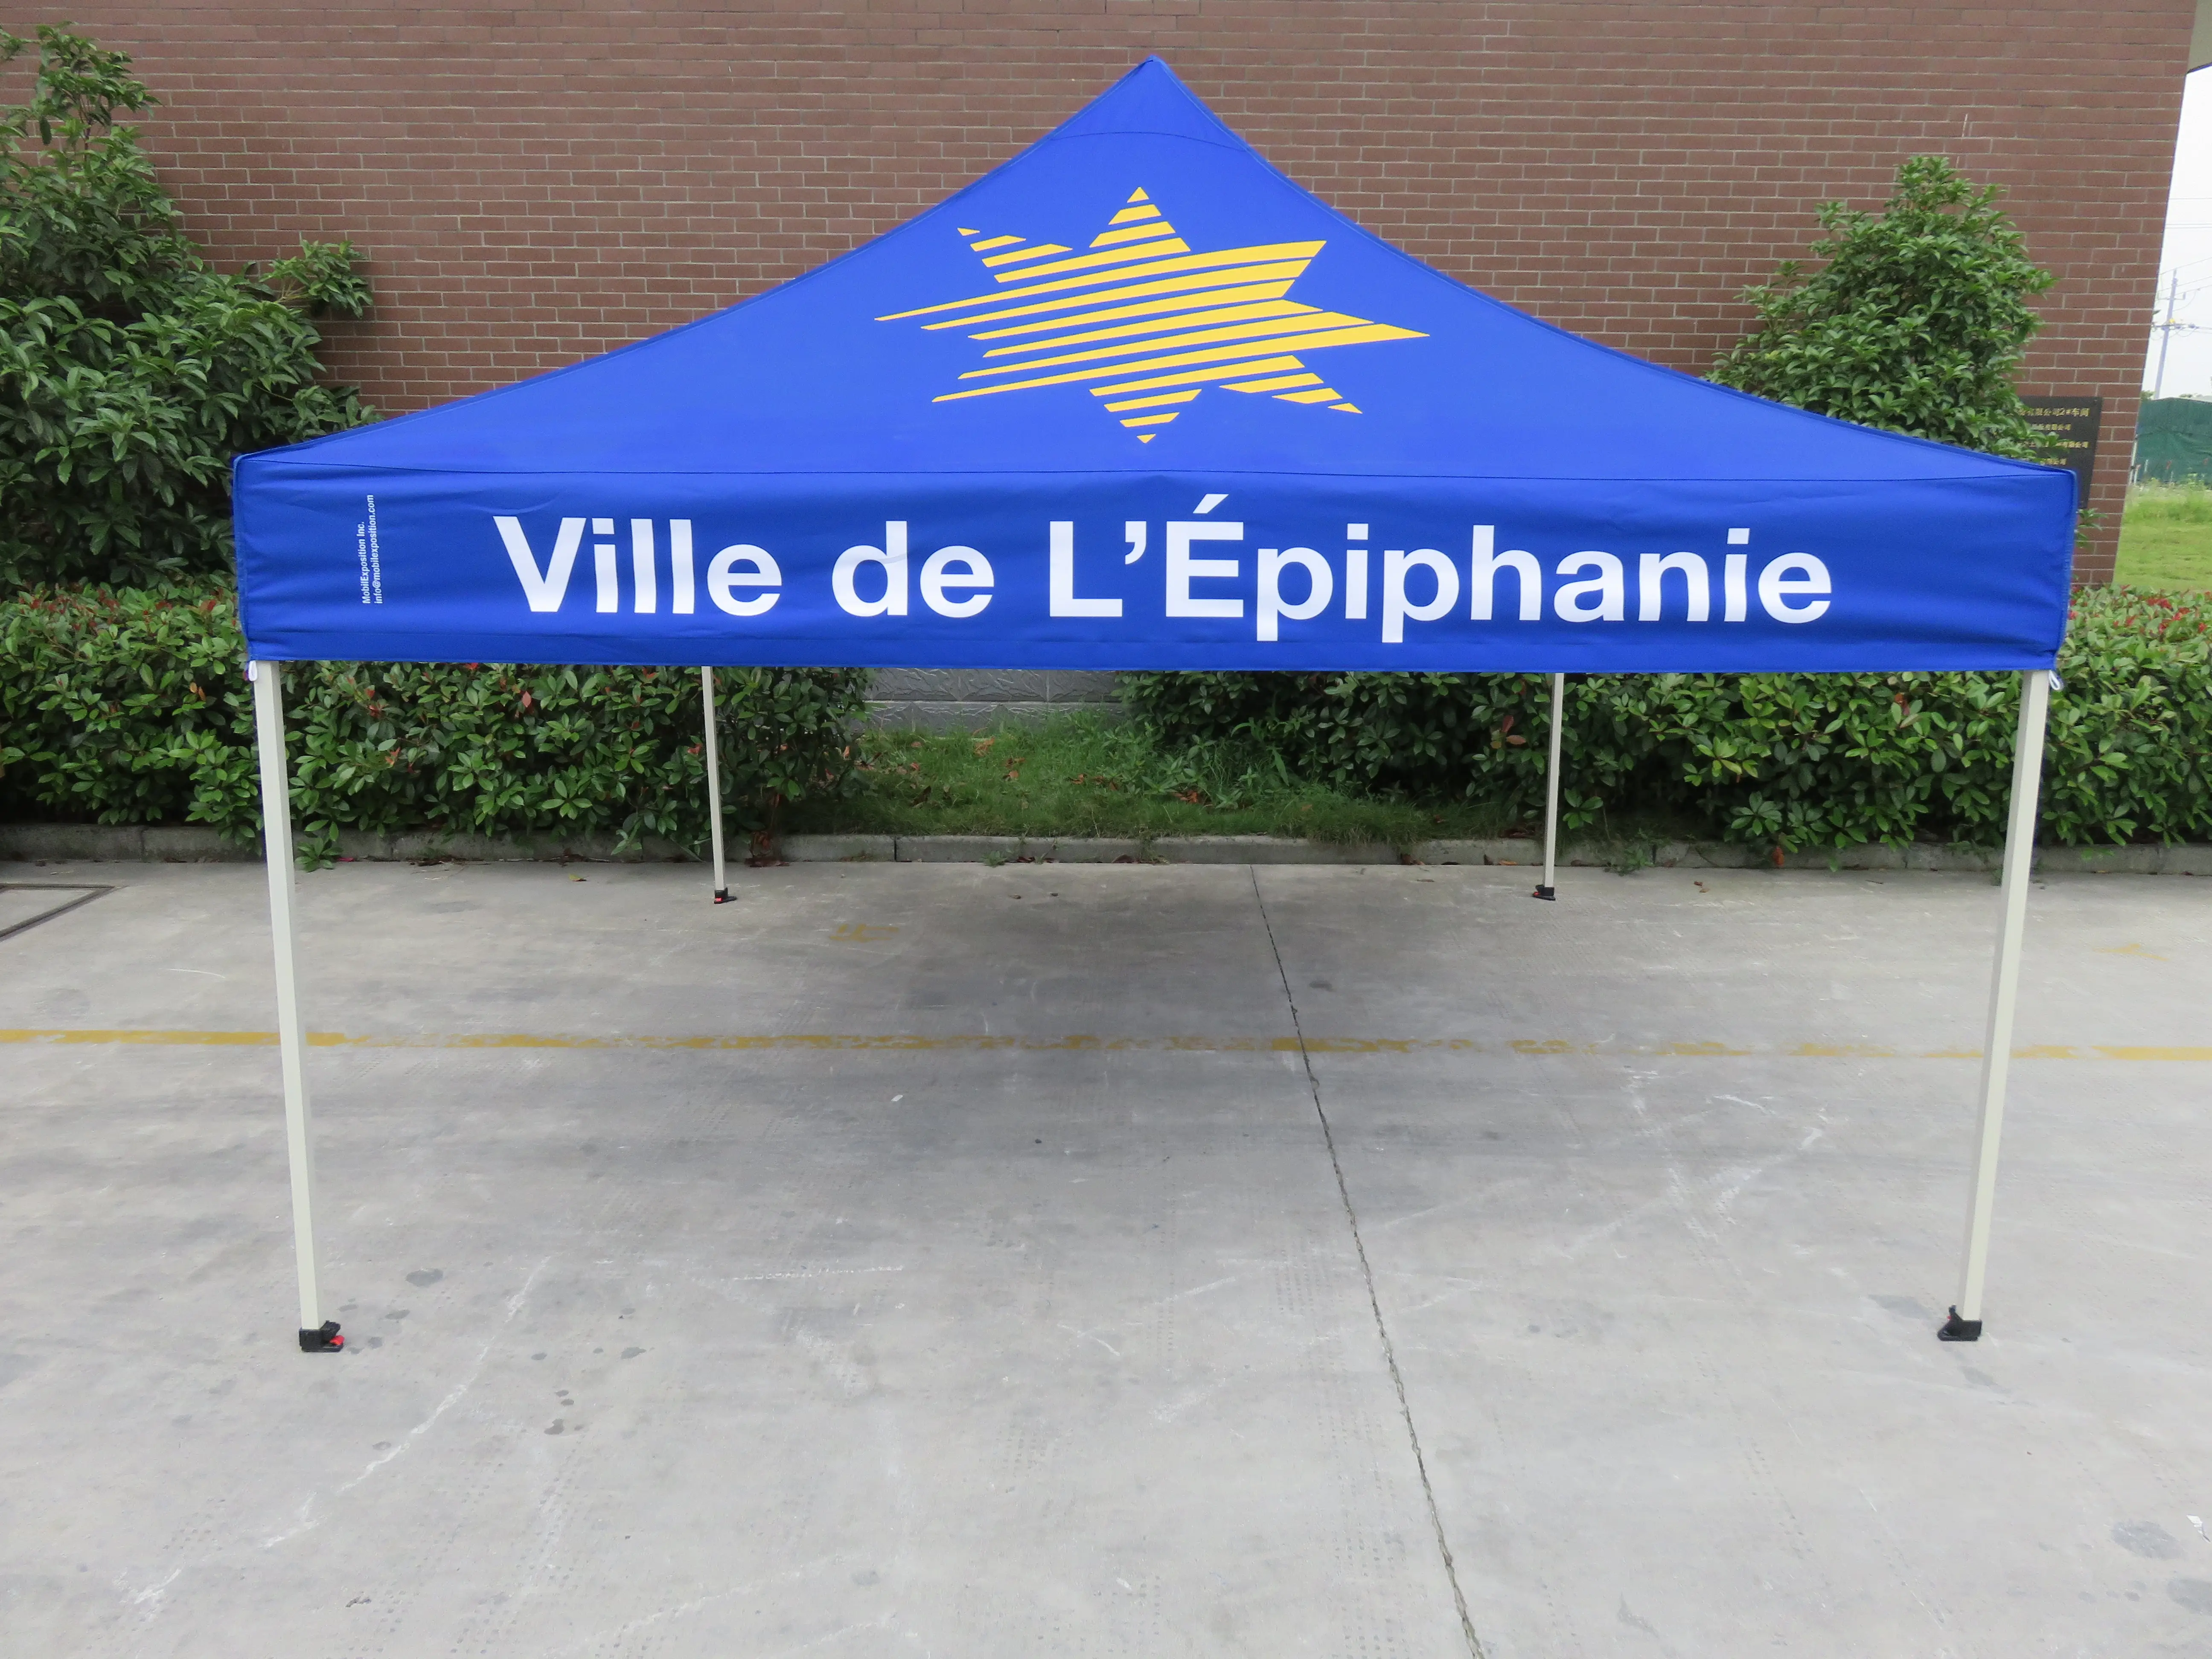 10'x10' Personalized Canopy Tent Roof   Valance Fully Printed all 4 Sides Full Color Printing